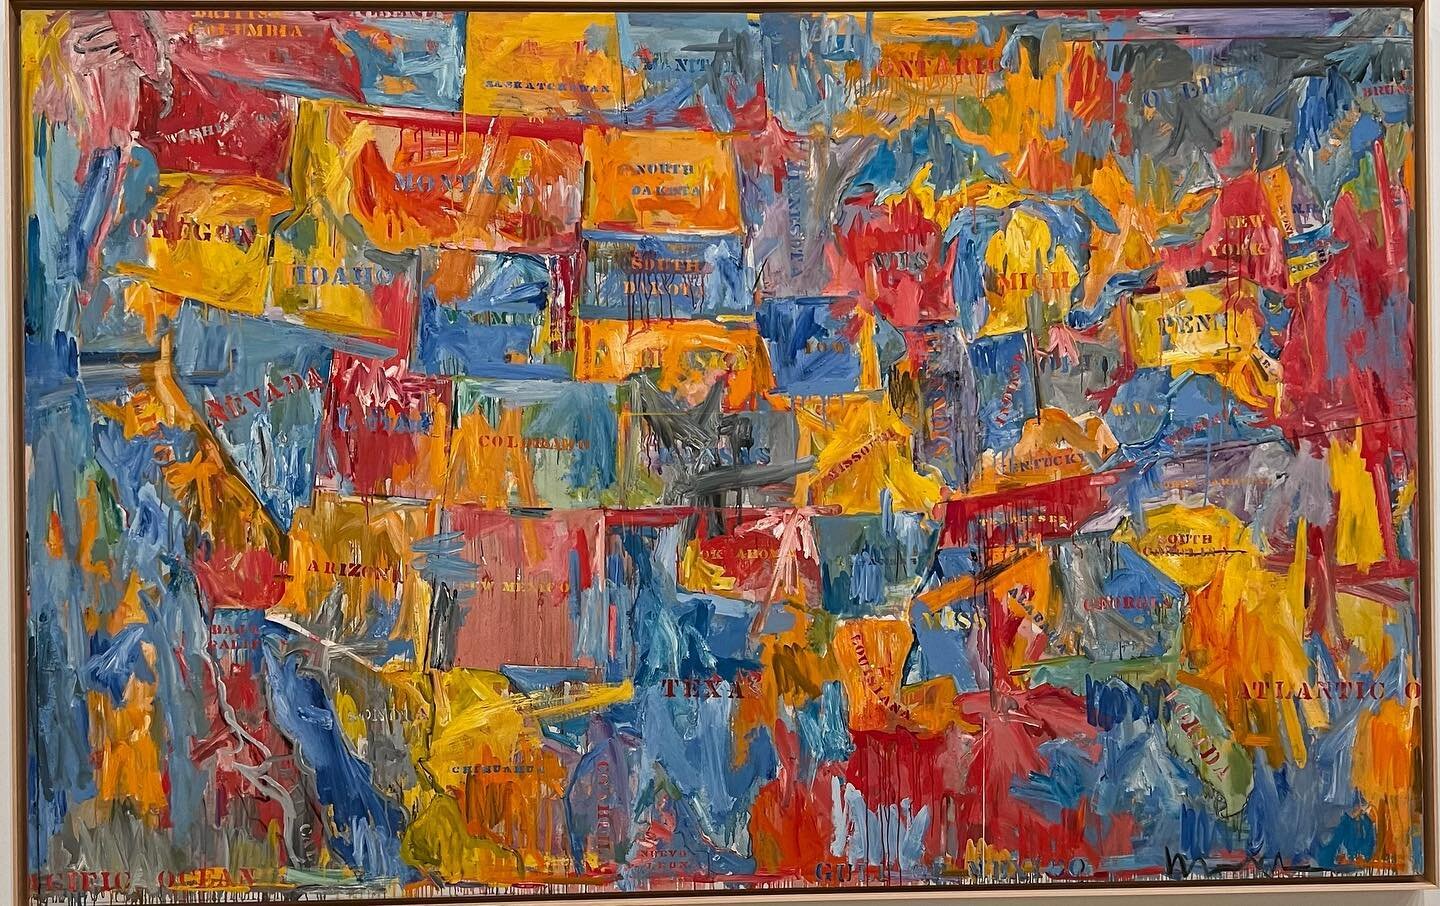 &ldquo;The map is not the territory&rdquo; 
This iconic Jasper Johns painting was on the cover of a high school textbook of mine. I was drawn to it and always remembered it, without specific reason. Now having seen, touched, smelled, tasted, felt&hel